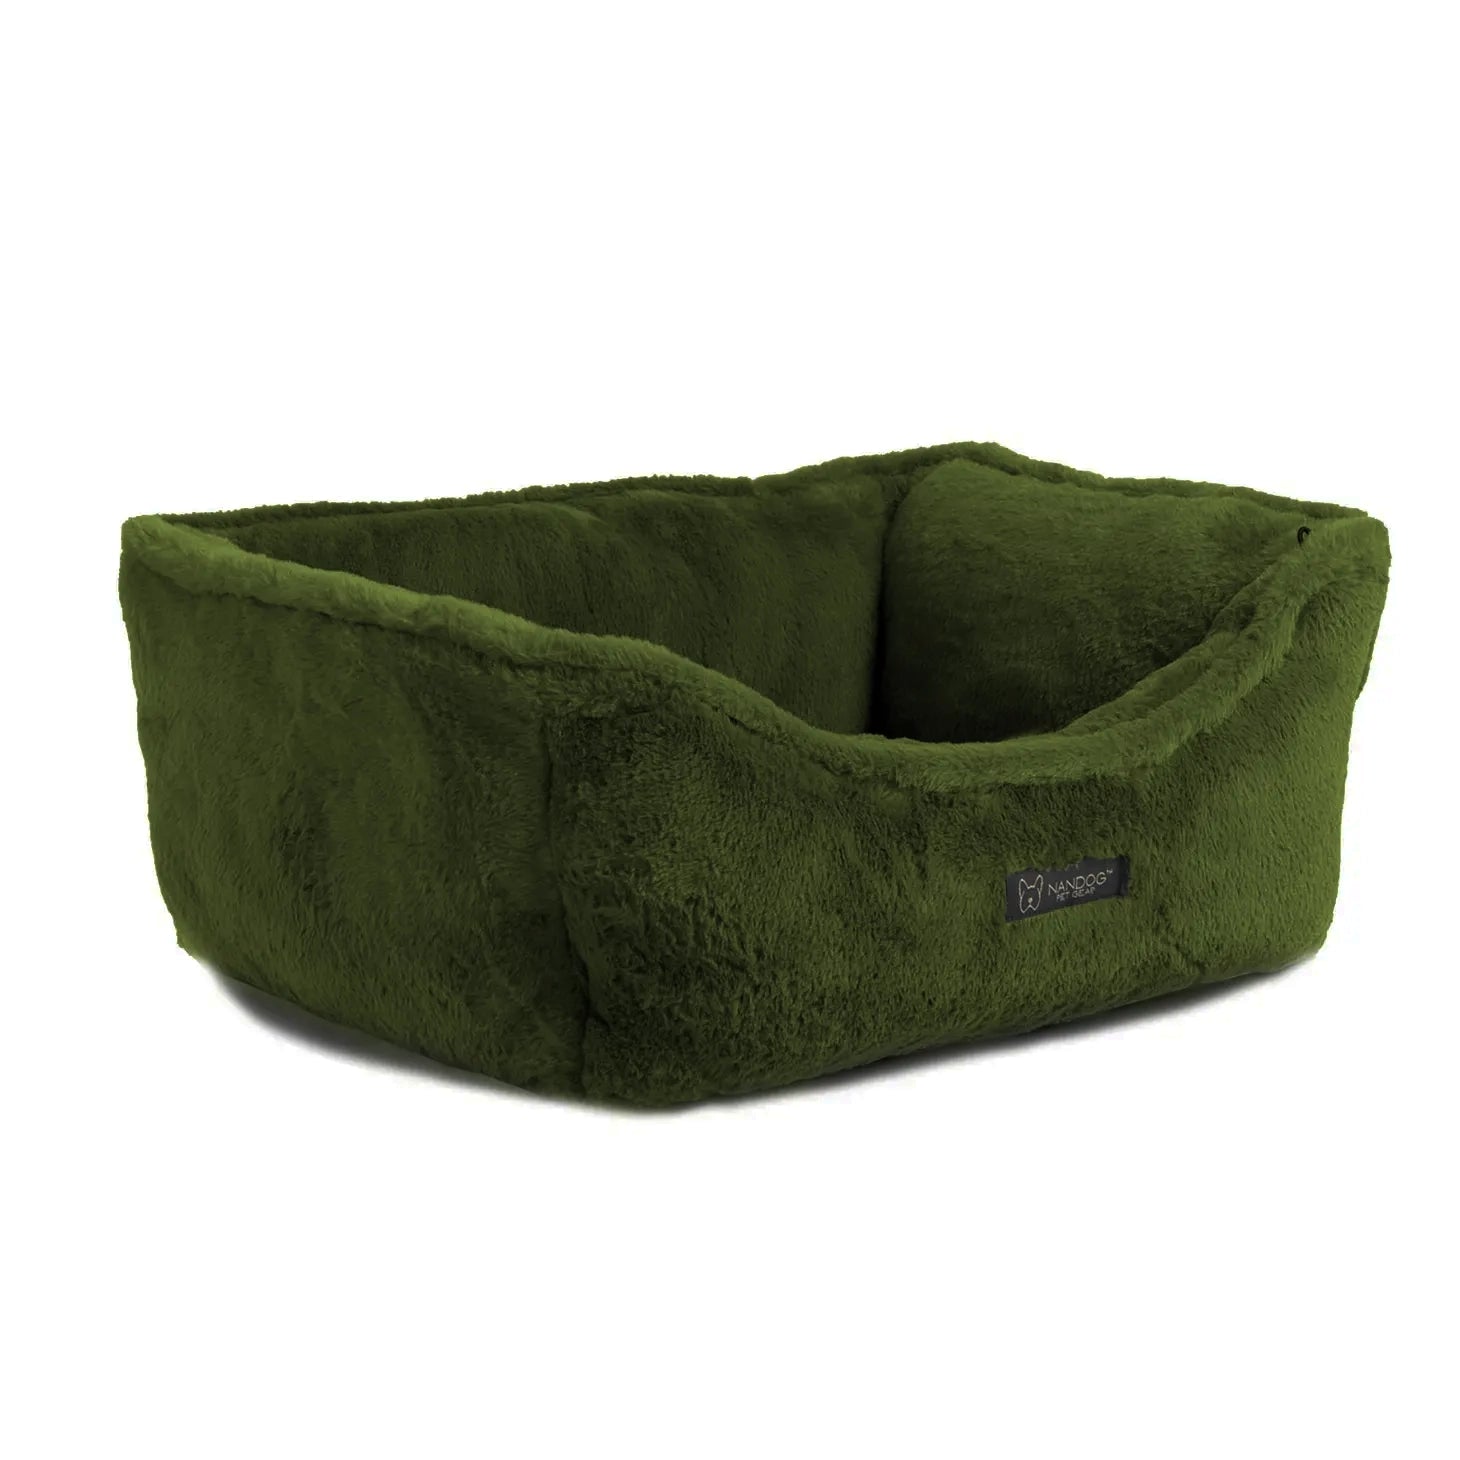 Cloud Reversible Bed - Olive Green